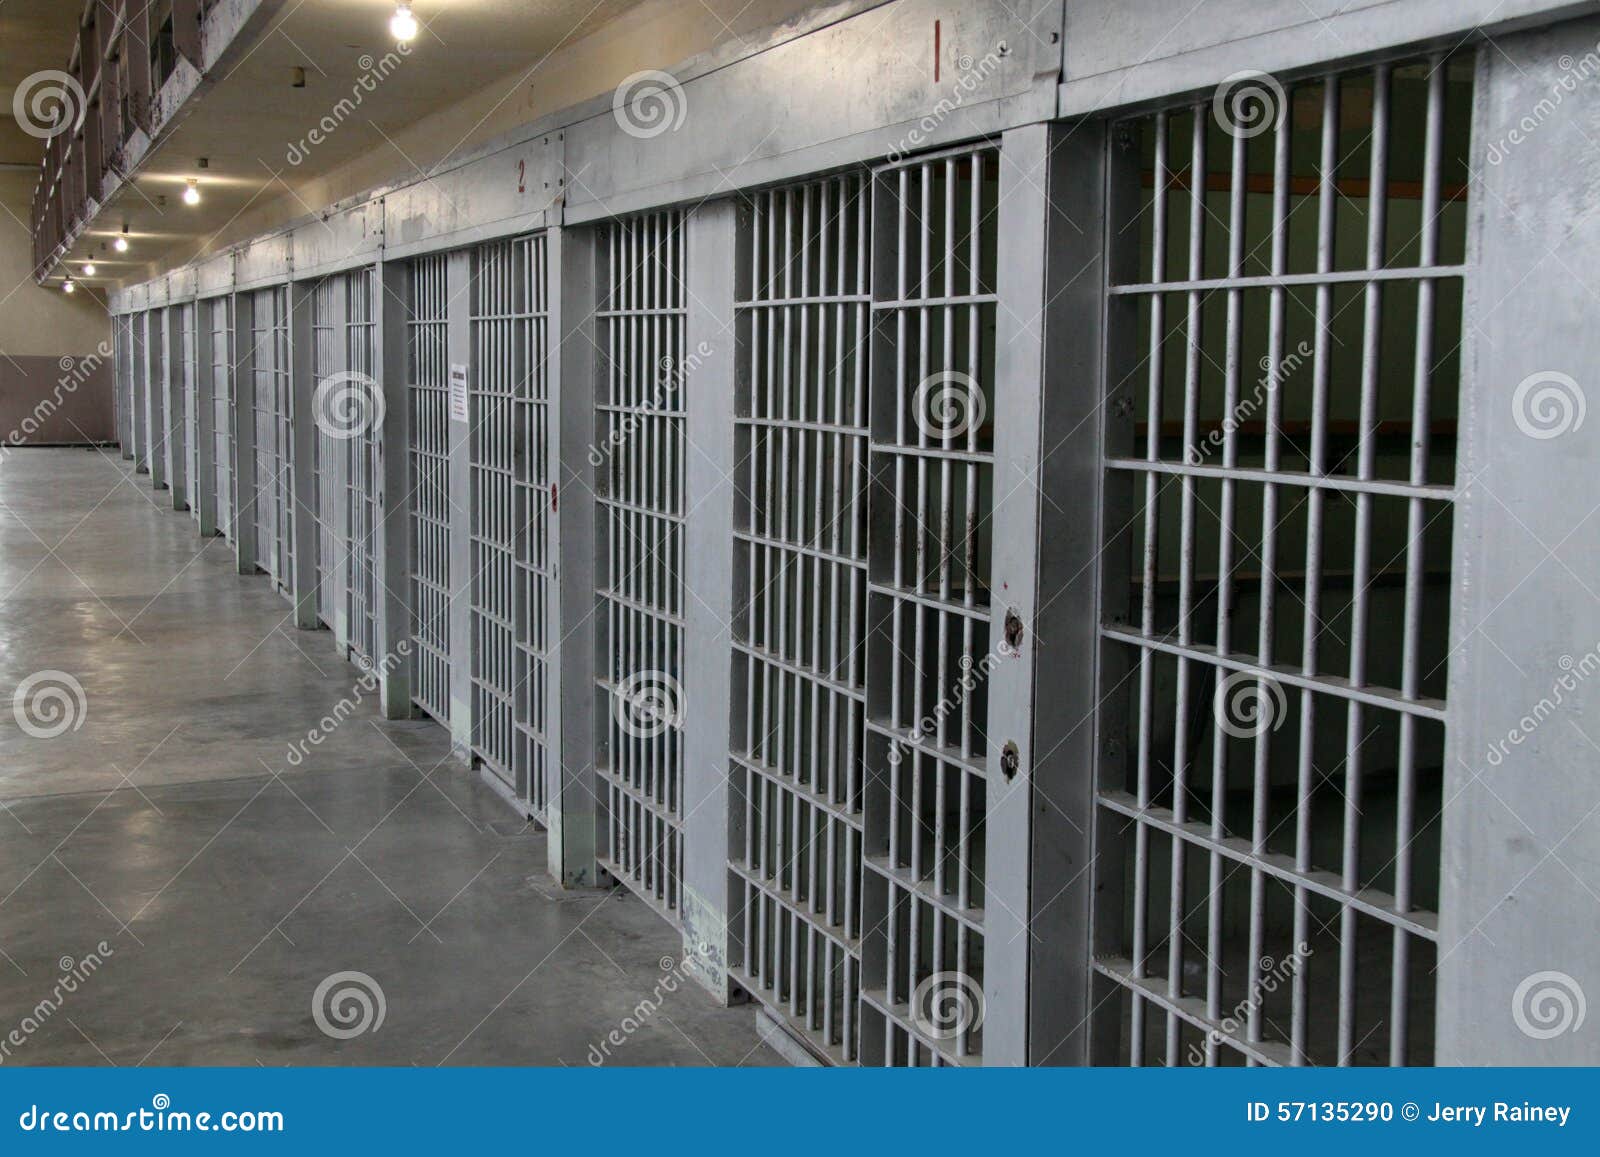 row of prison cells in a cell block